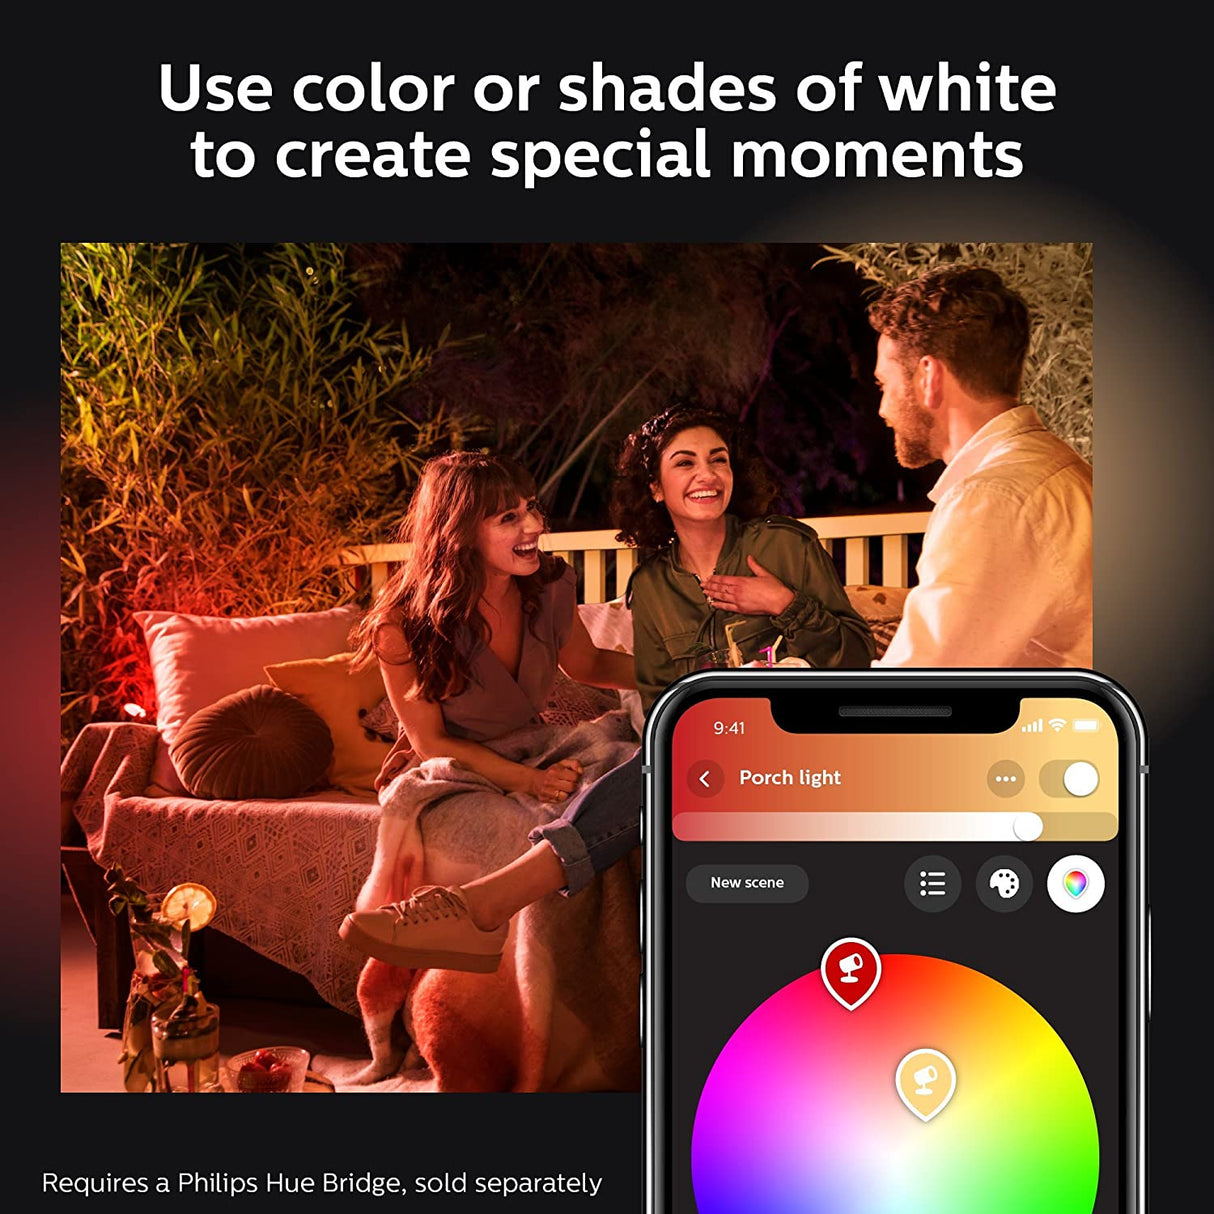 Philips Hue Lily White &amp; Color Outdoor Smart Spot Light Extension (Hue Hub &amp; Power Source Required), 1 Hue White &amp; Color Smart Spot Light + Mount kit, Works with Alexa, HomeKit &amp; Google Assistant